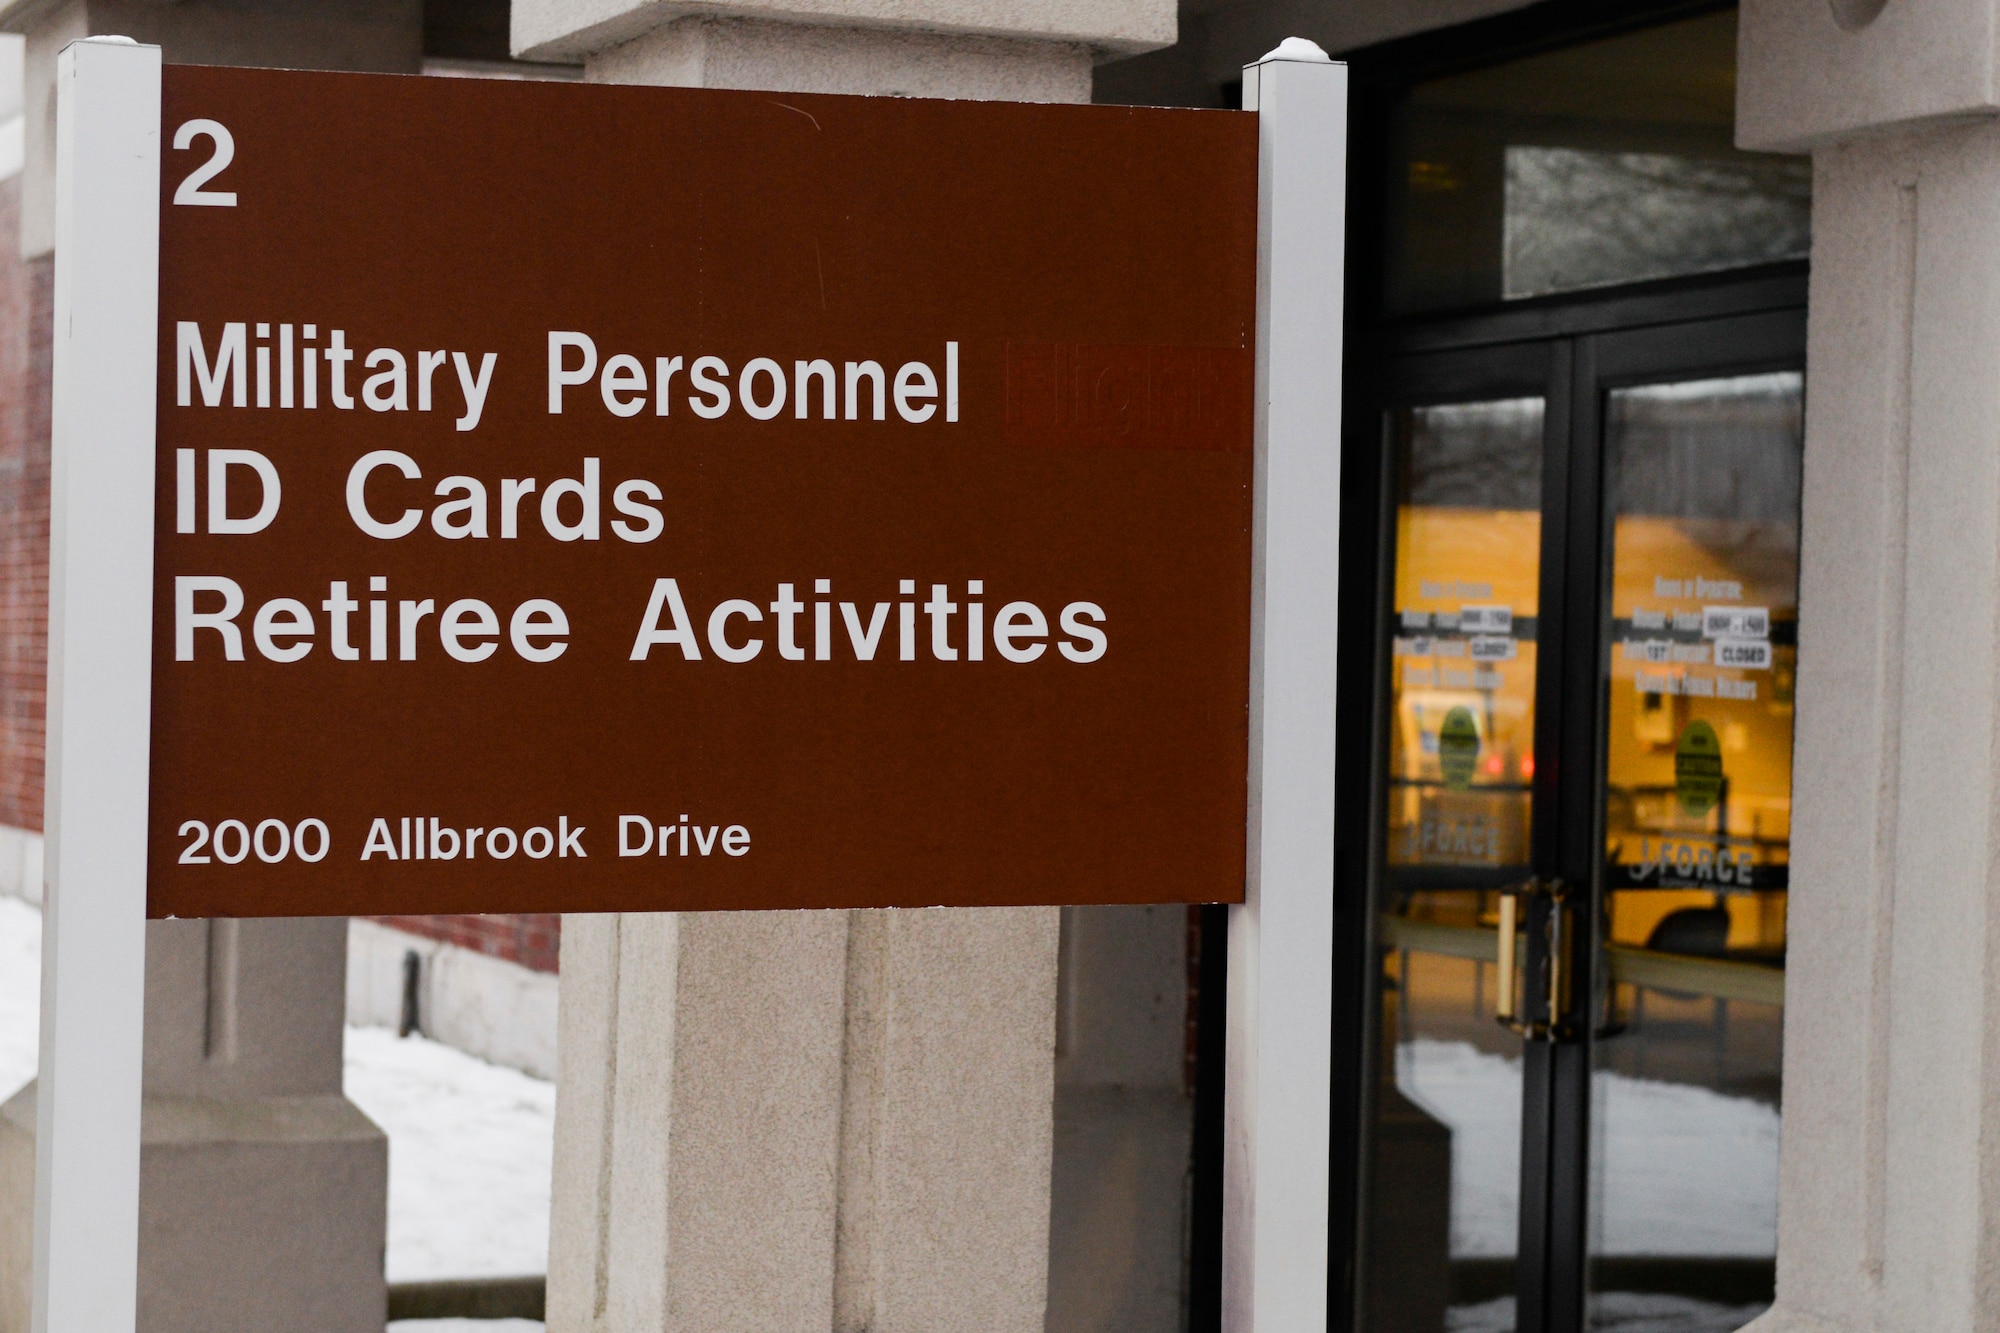 A sign outside a military building indicates: "Military Personnel ID Cards Retiree Activities."